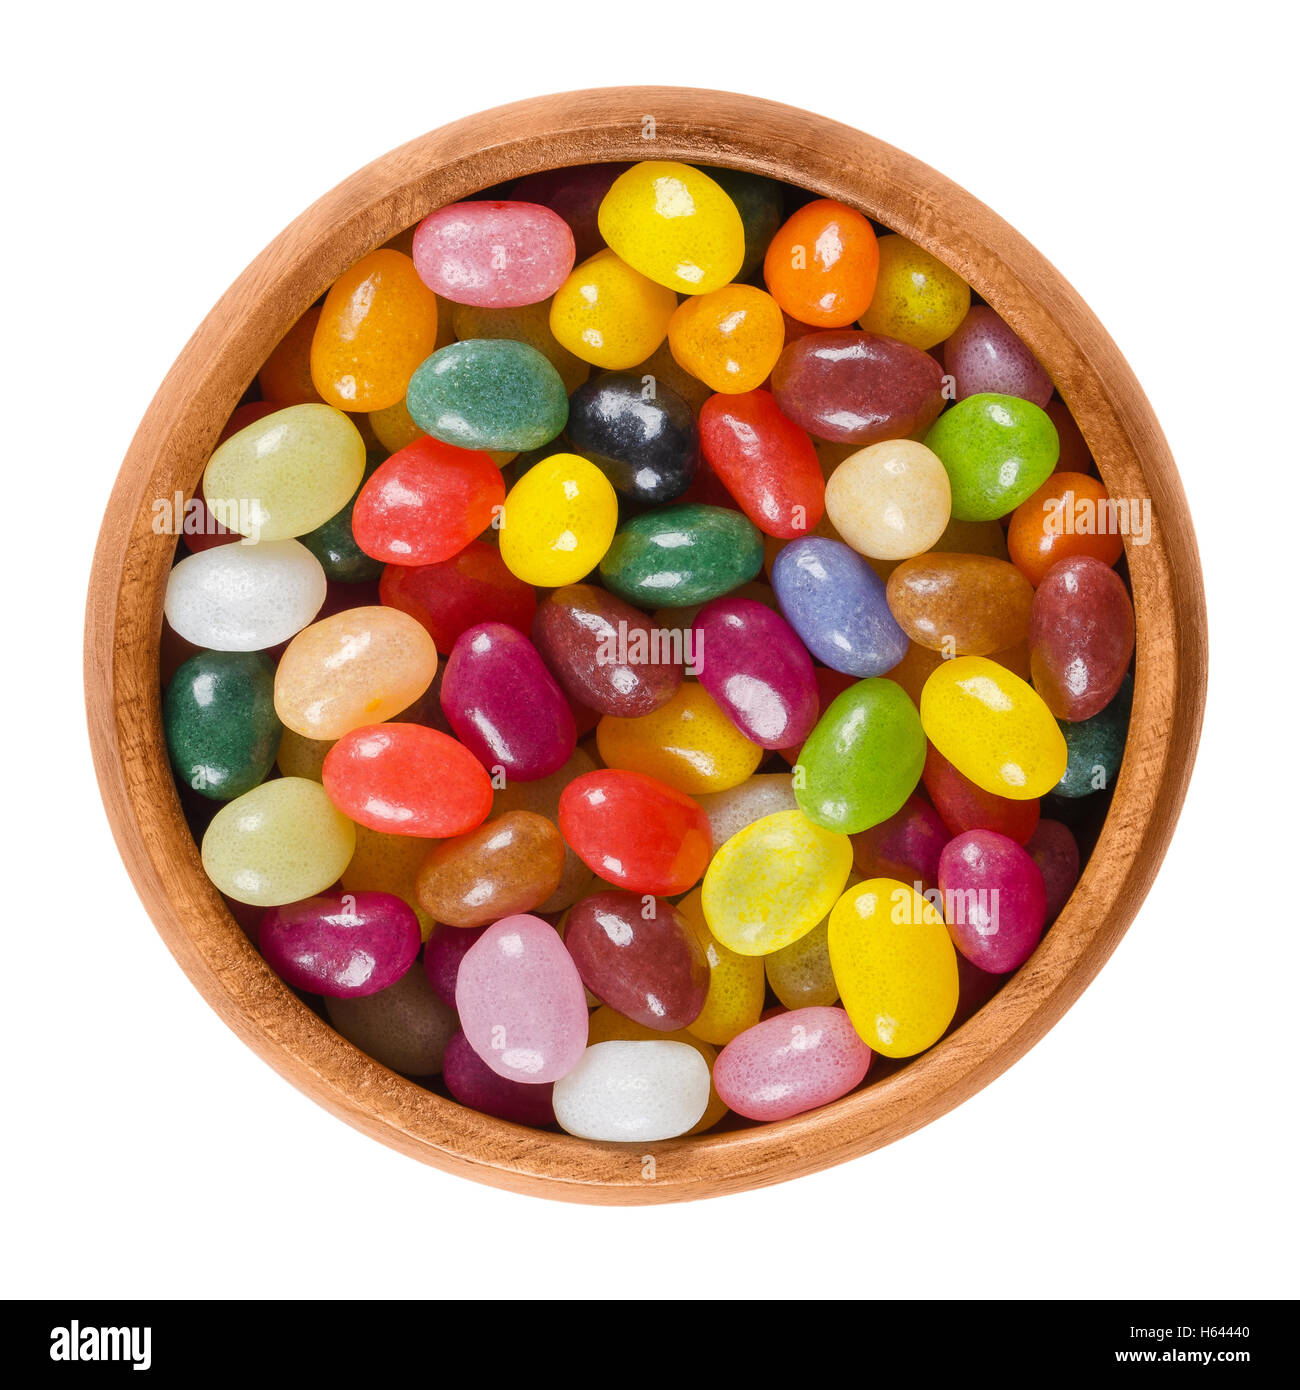 Jelly beans in wooden bowl on white background. Assorted small bean-shaped sugar candies in different colors with soft candy. Stock Photo